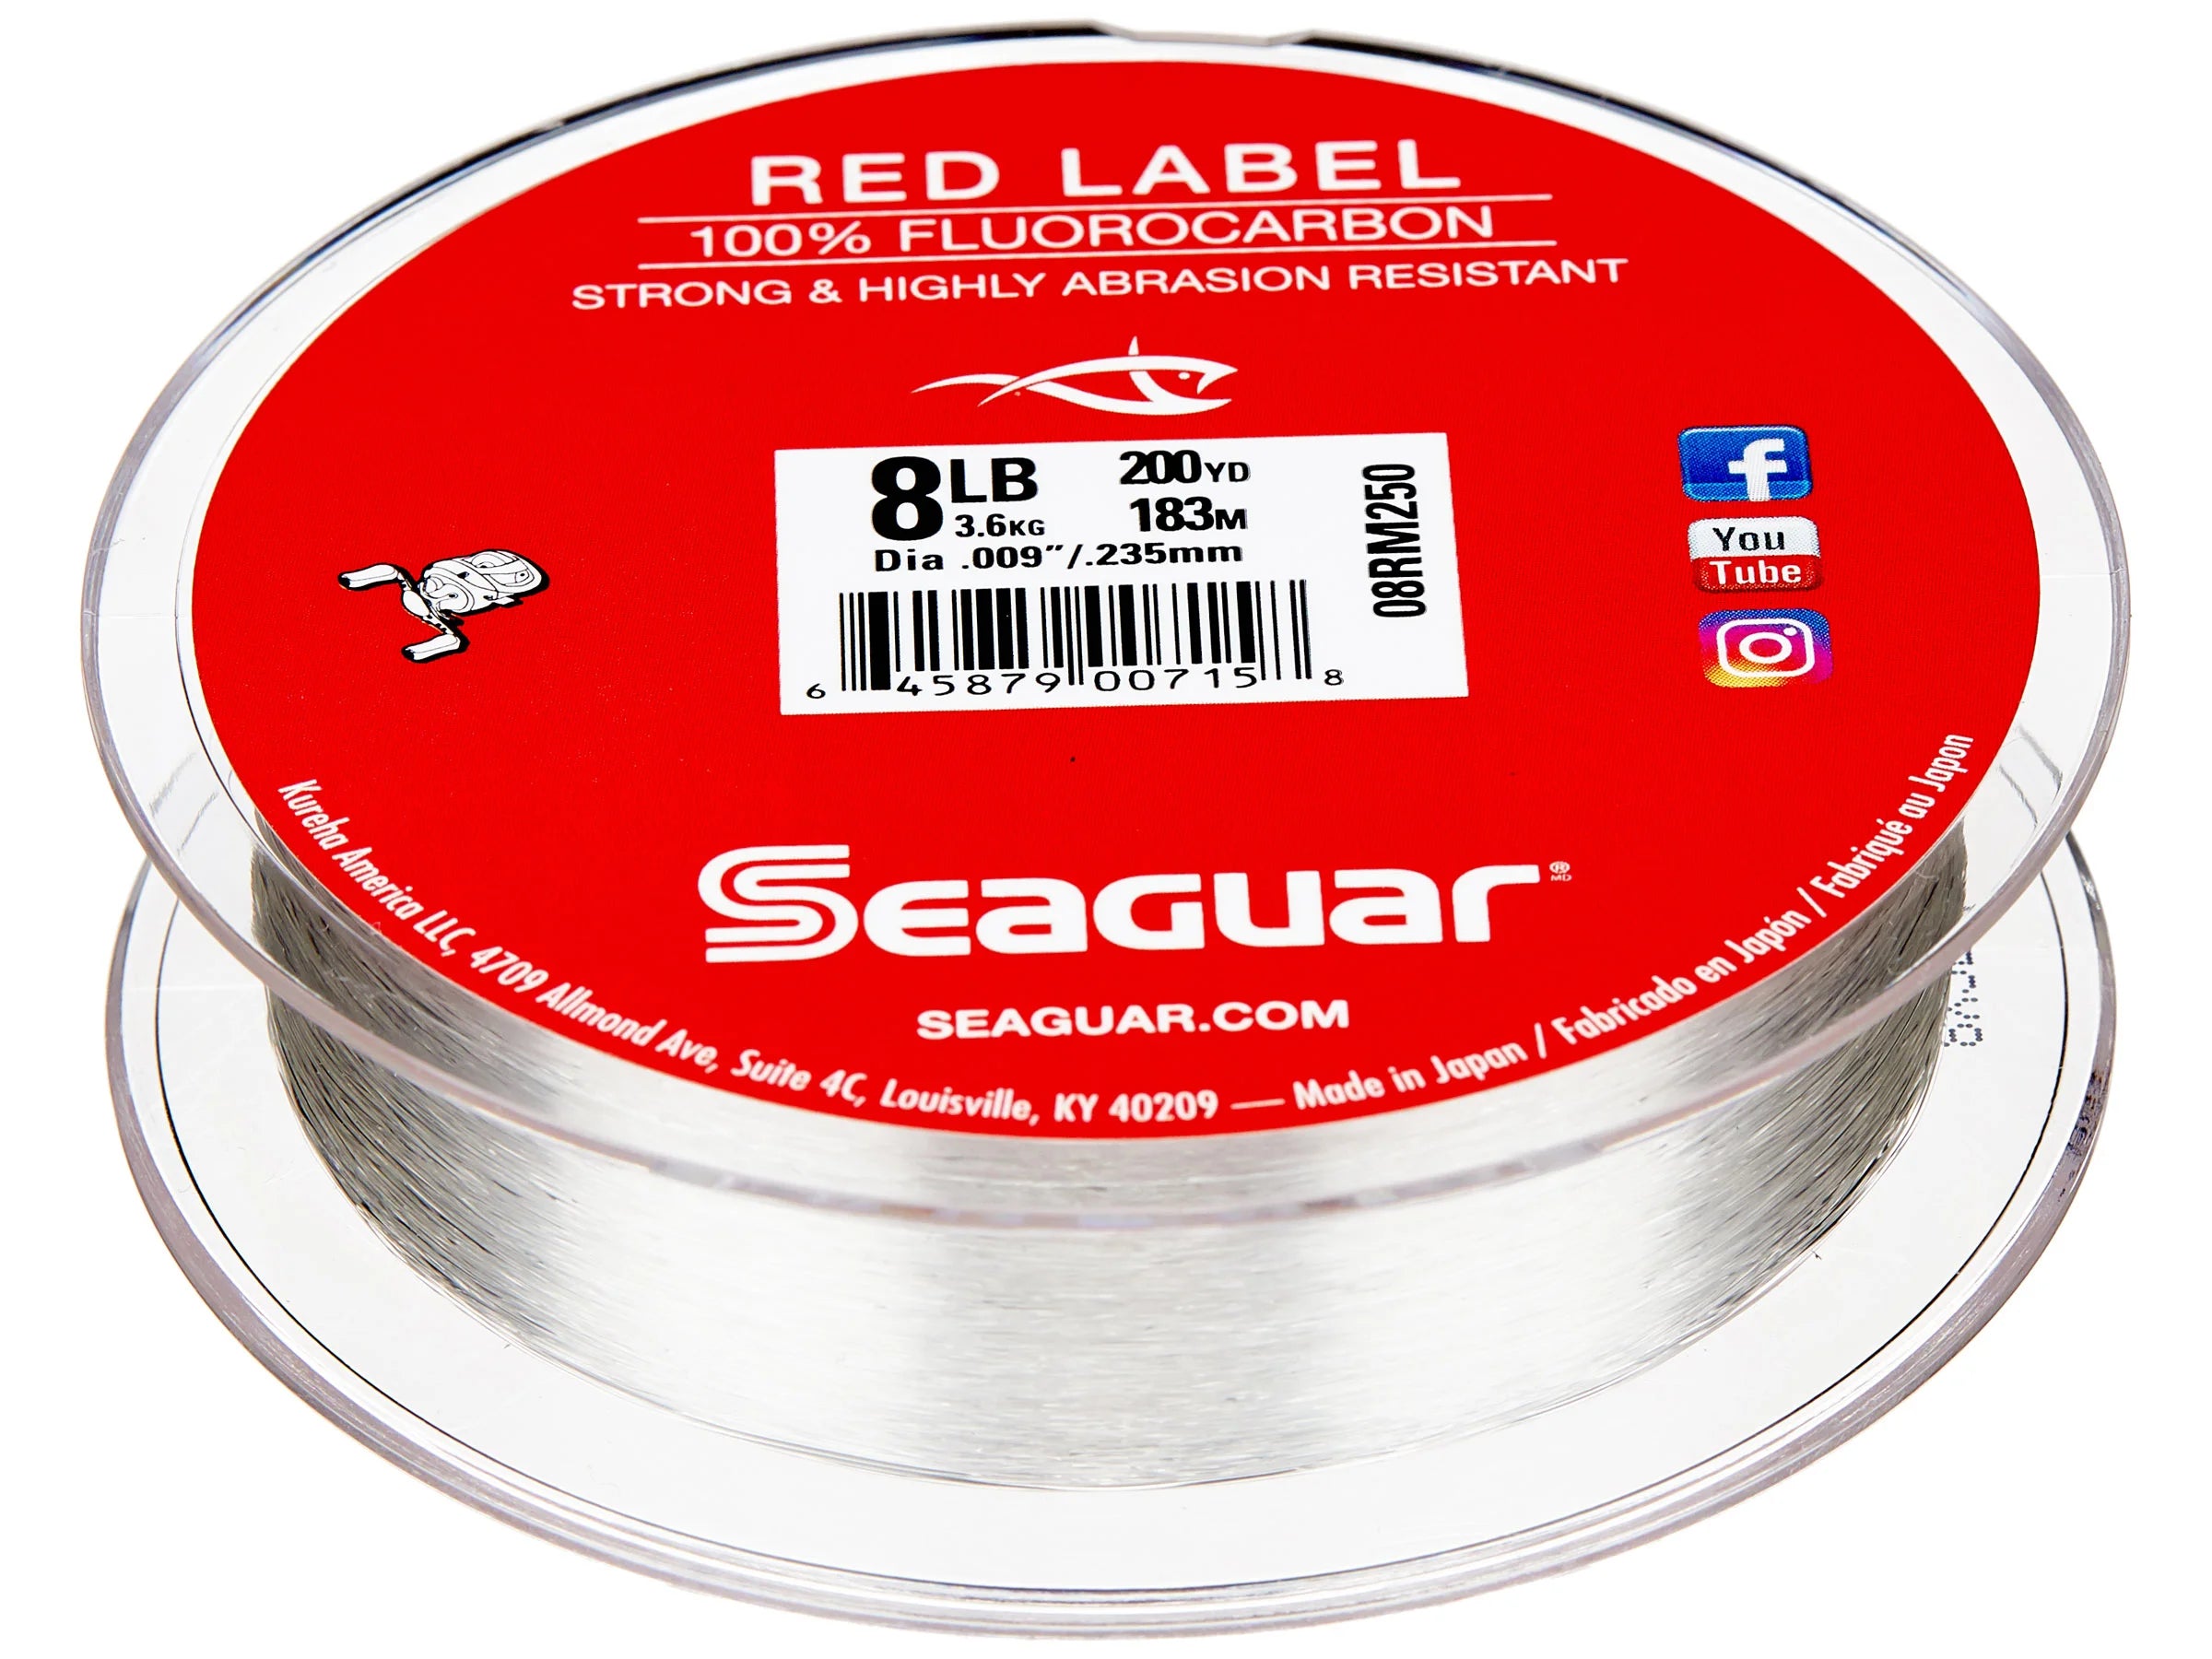 Seaguar Red Label 100% Fluorocarbon 200yds - Discount Fishing Tackle